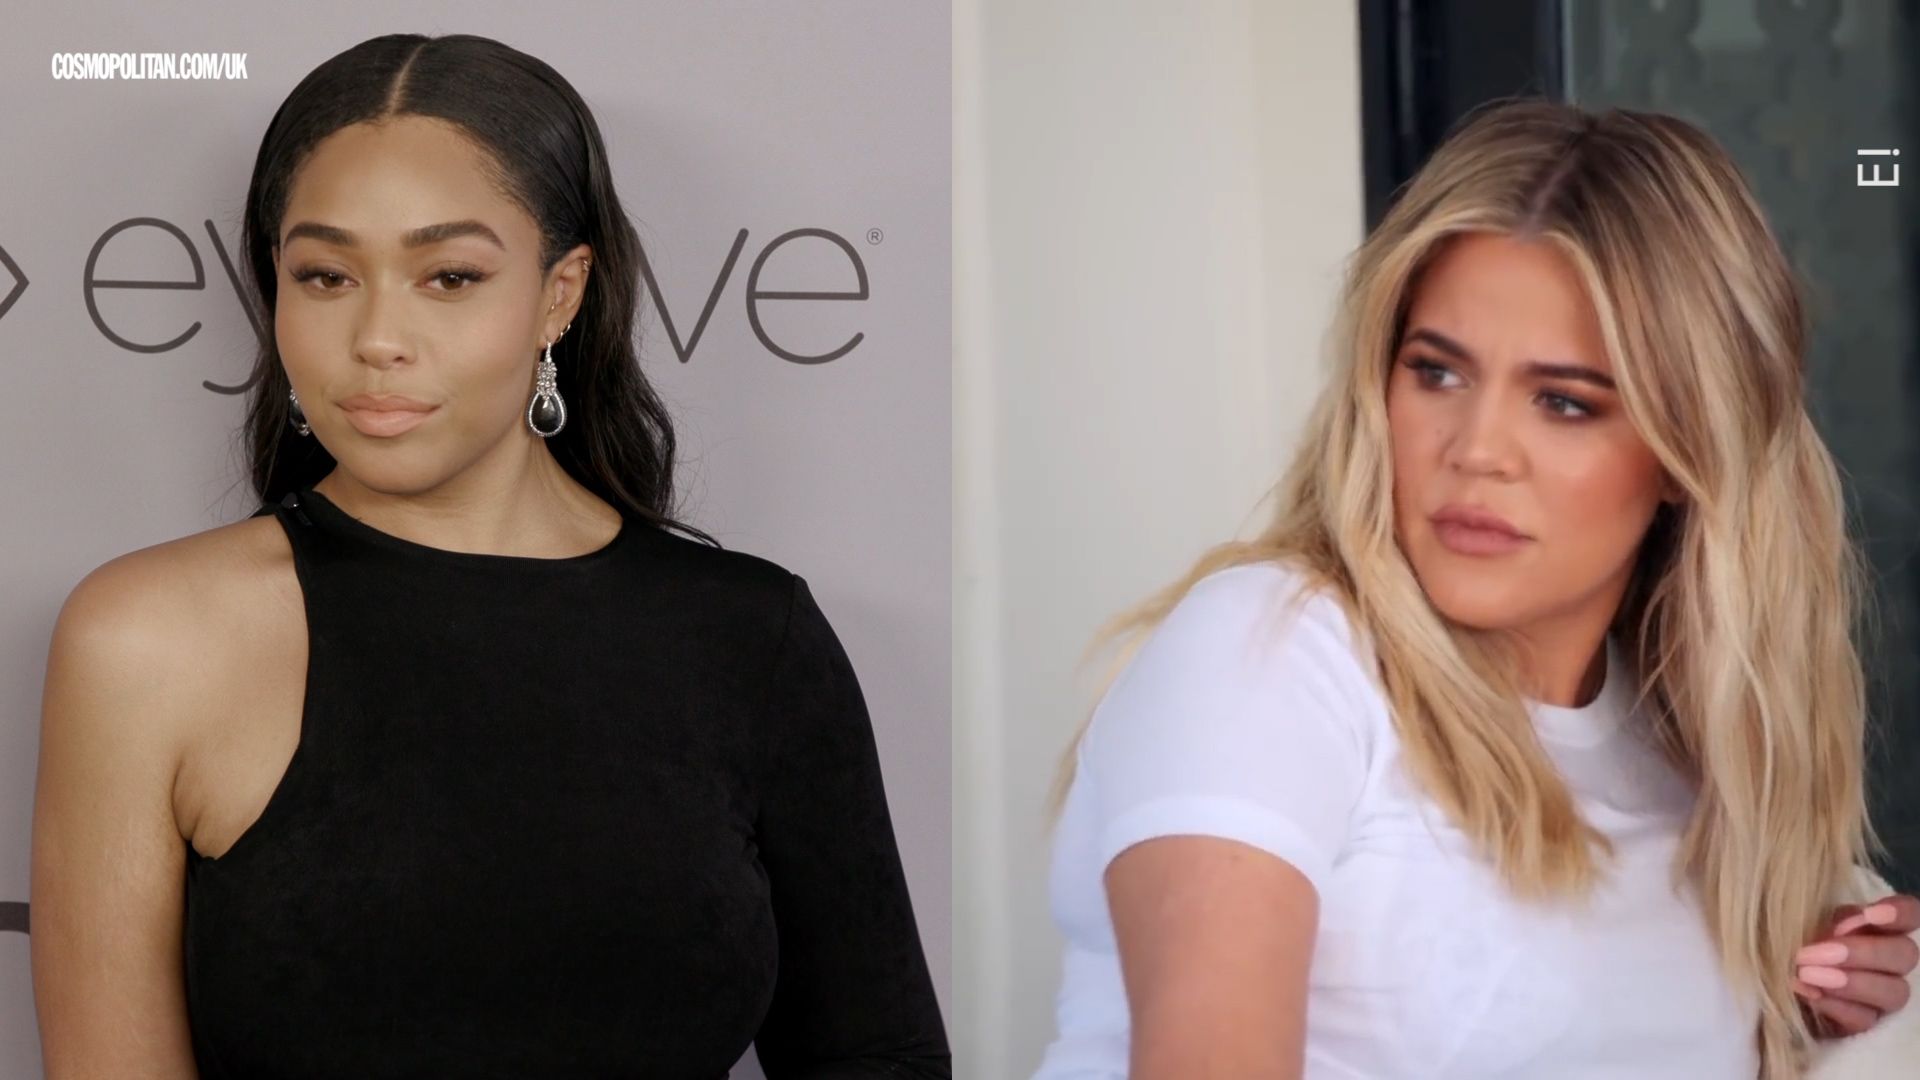 Kylie Jenner and Jordyn Woods — the beginning of a frenaissance?